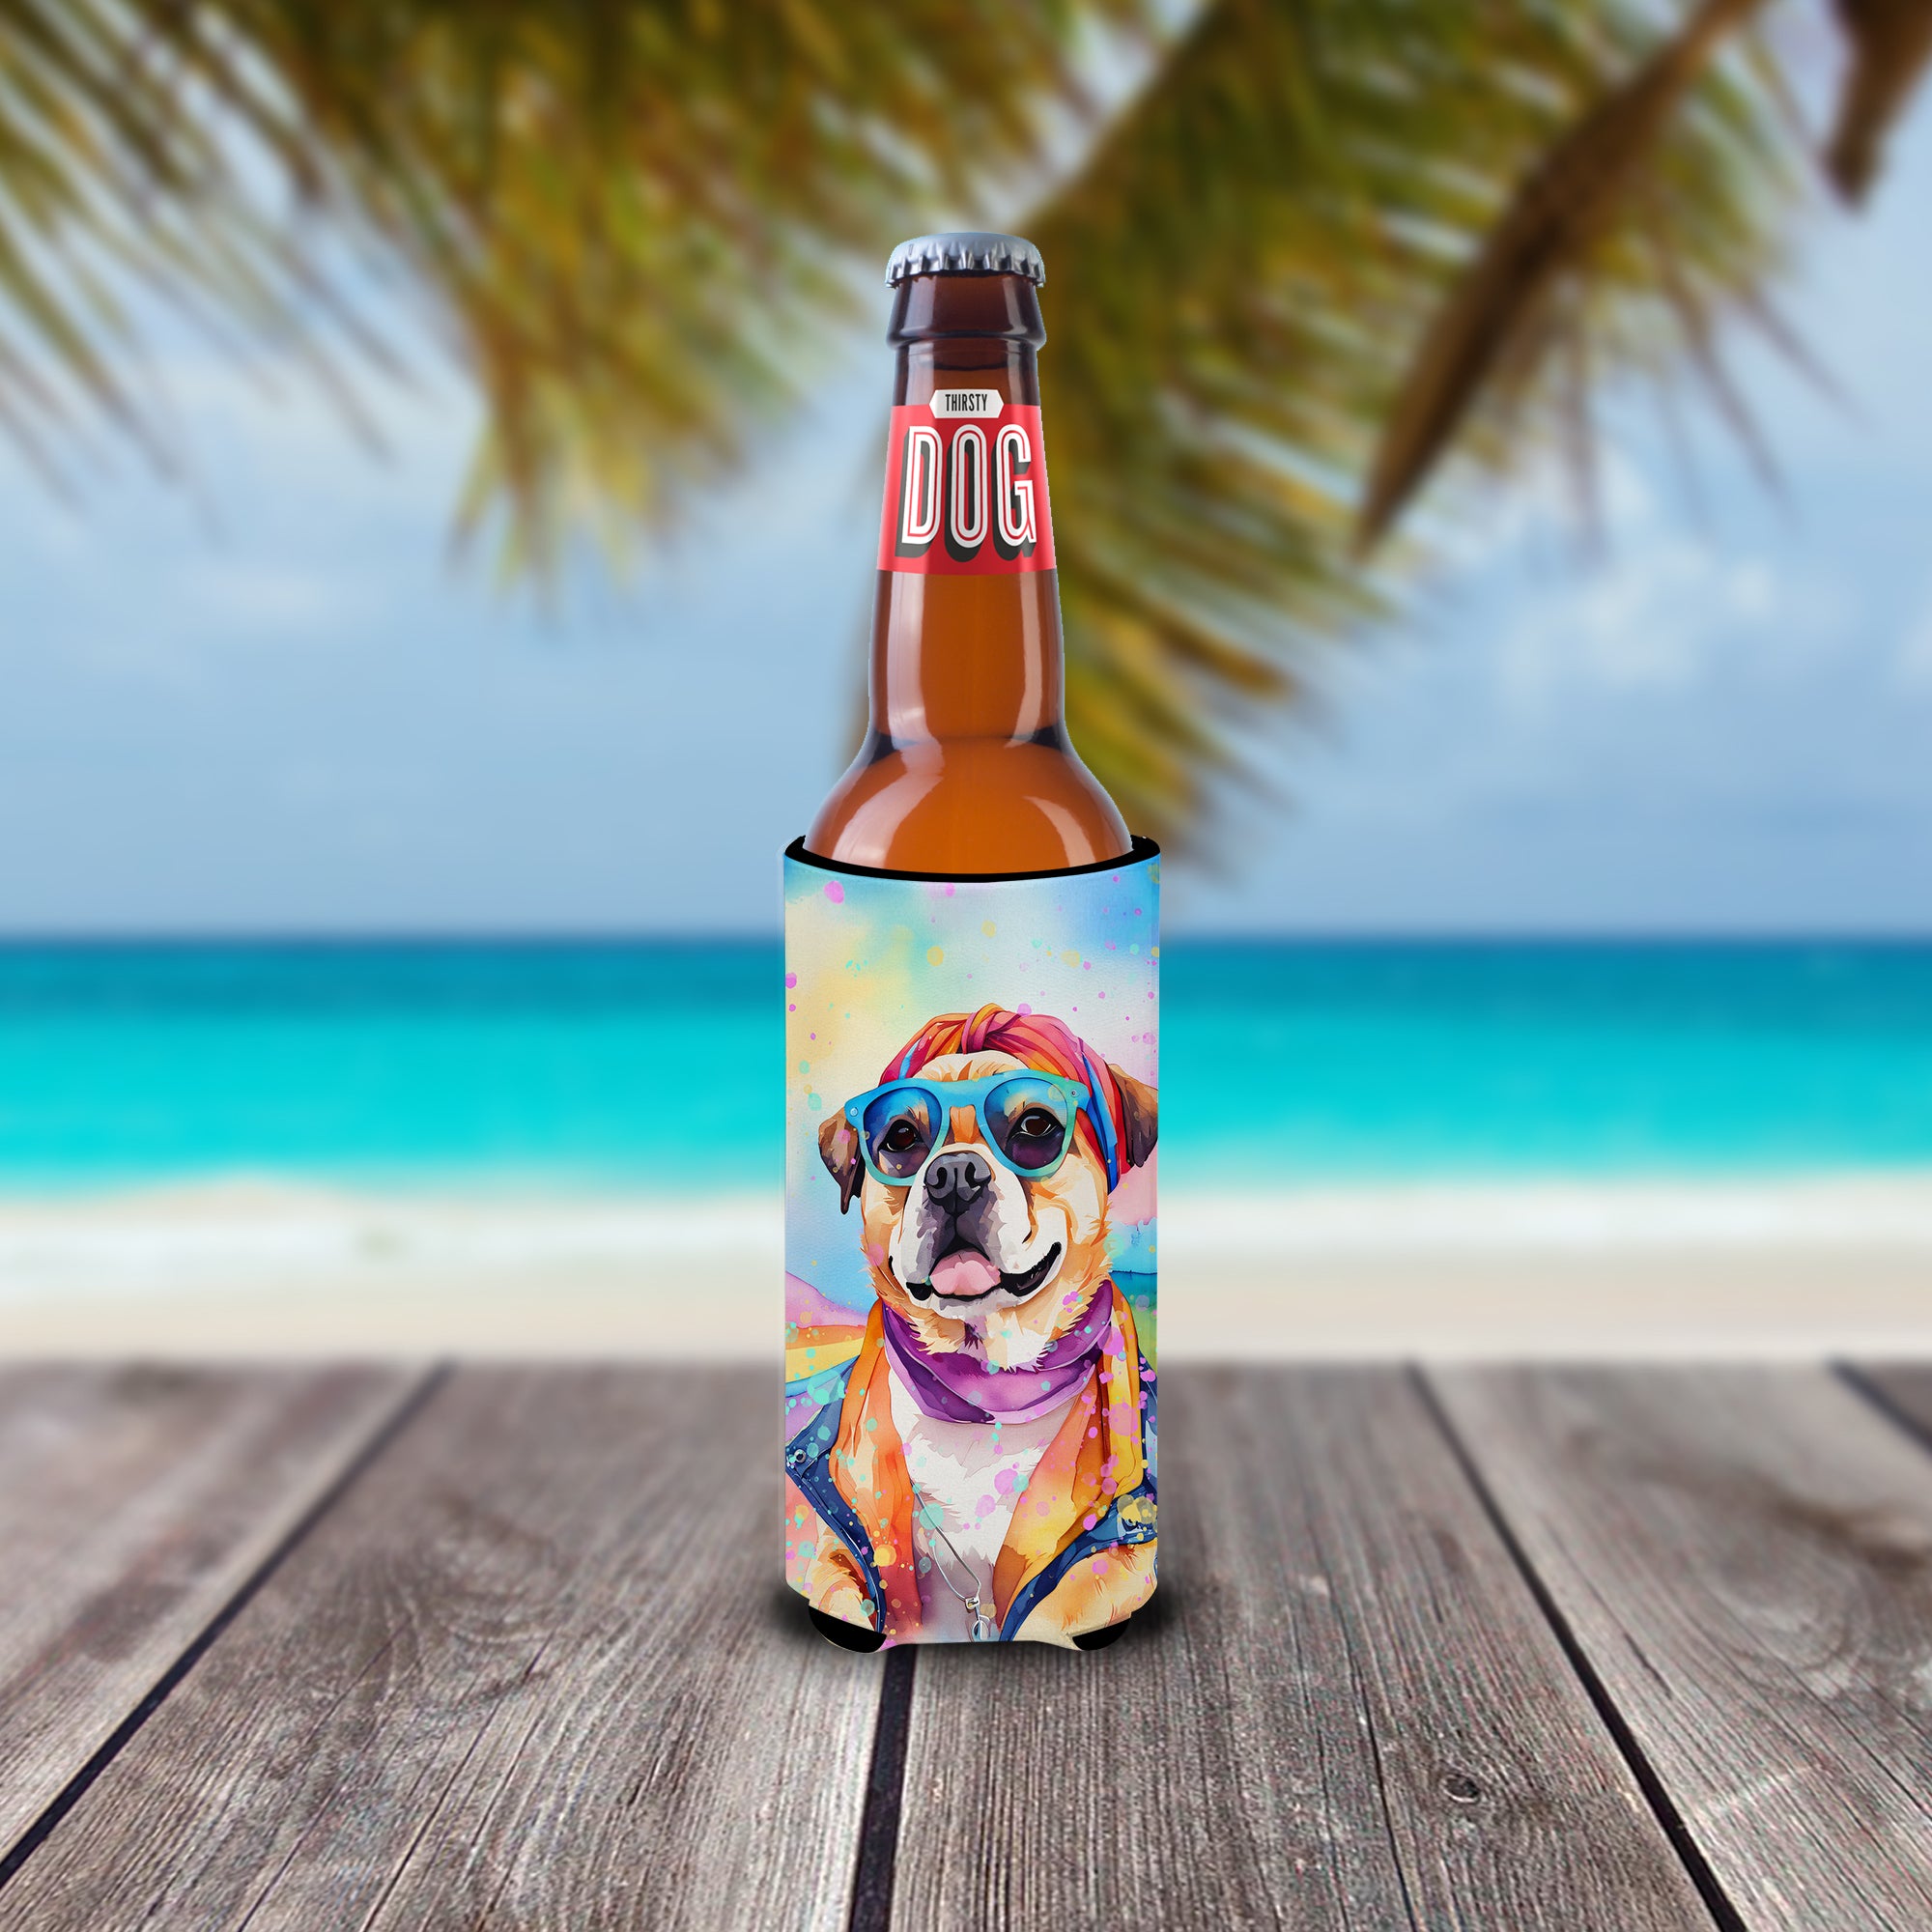 Buy this Pug Hippie Dawg Hugger for Ultra Slim Cans